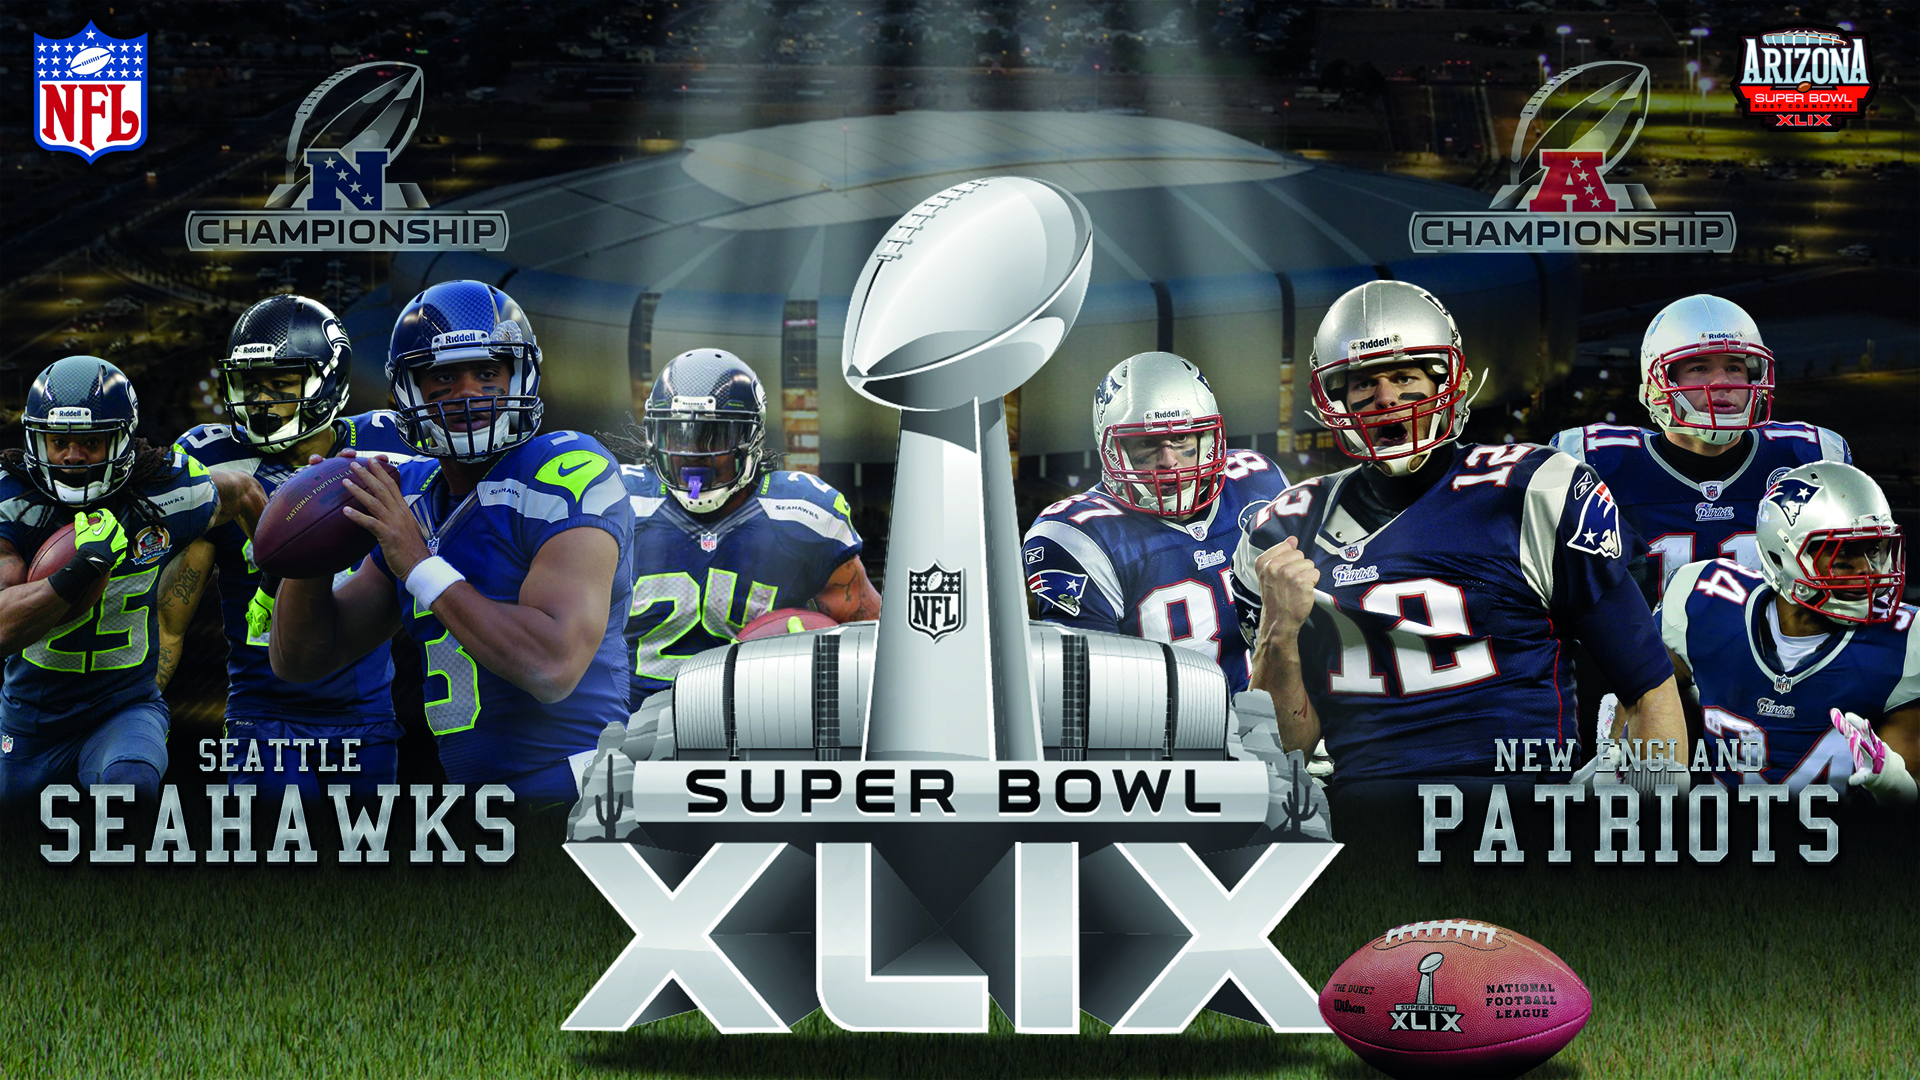 SUPER BOWL 50 WALLPAPERS FREE Wallpapers Background images 1920x1080